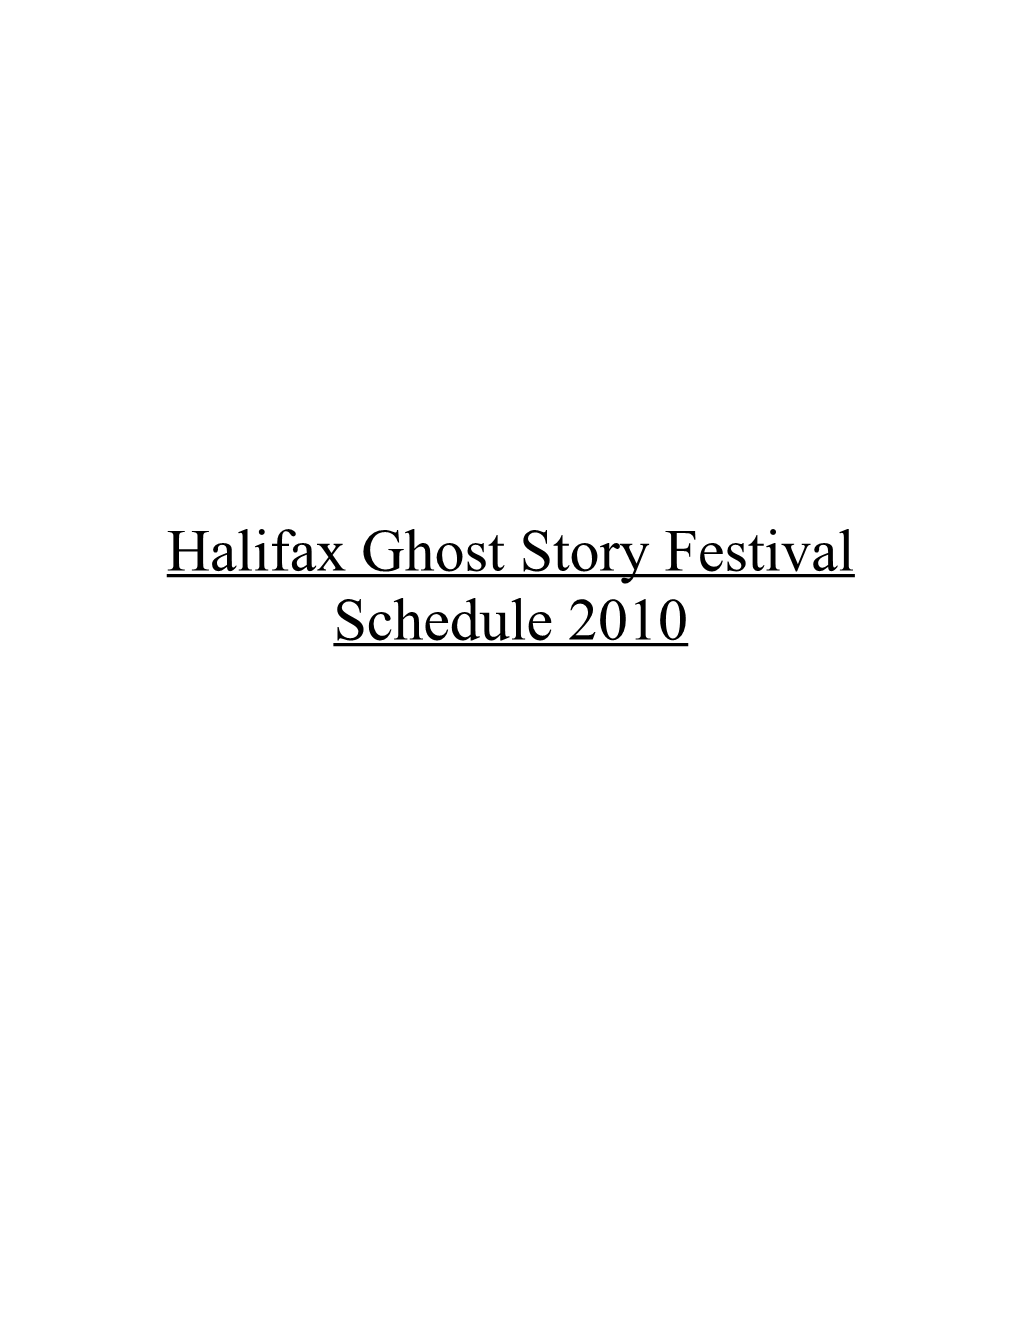 Halifax Ghost Story Festival Schedule 2010